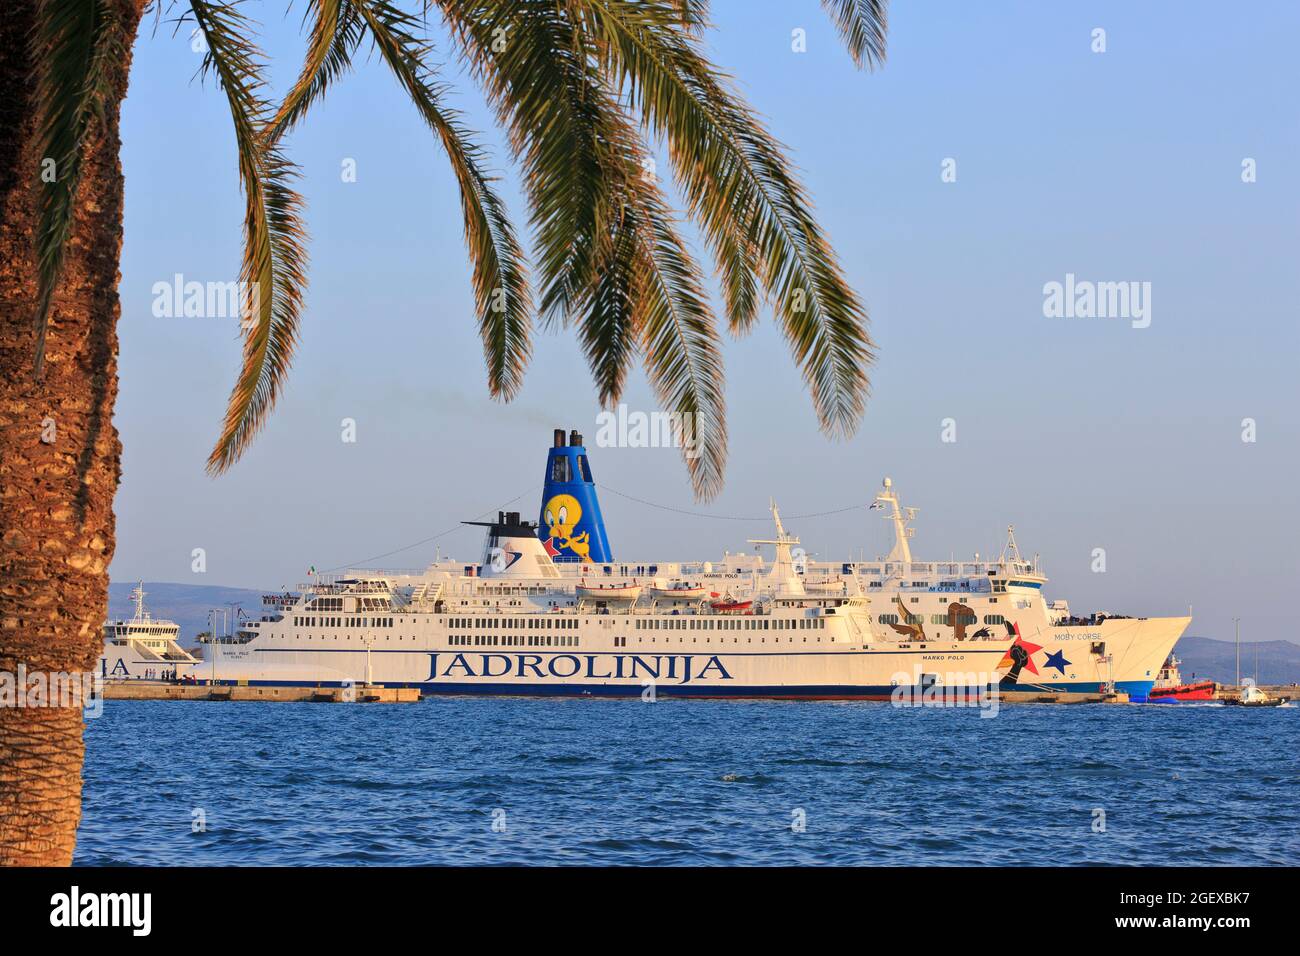 The Marko Polo (Jadrolinija) and Mobe Corse (Moby Lines) car ferries moored in the port of Split Croatia Stock Photo